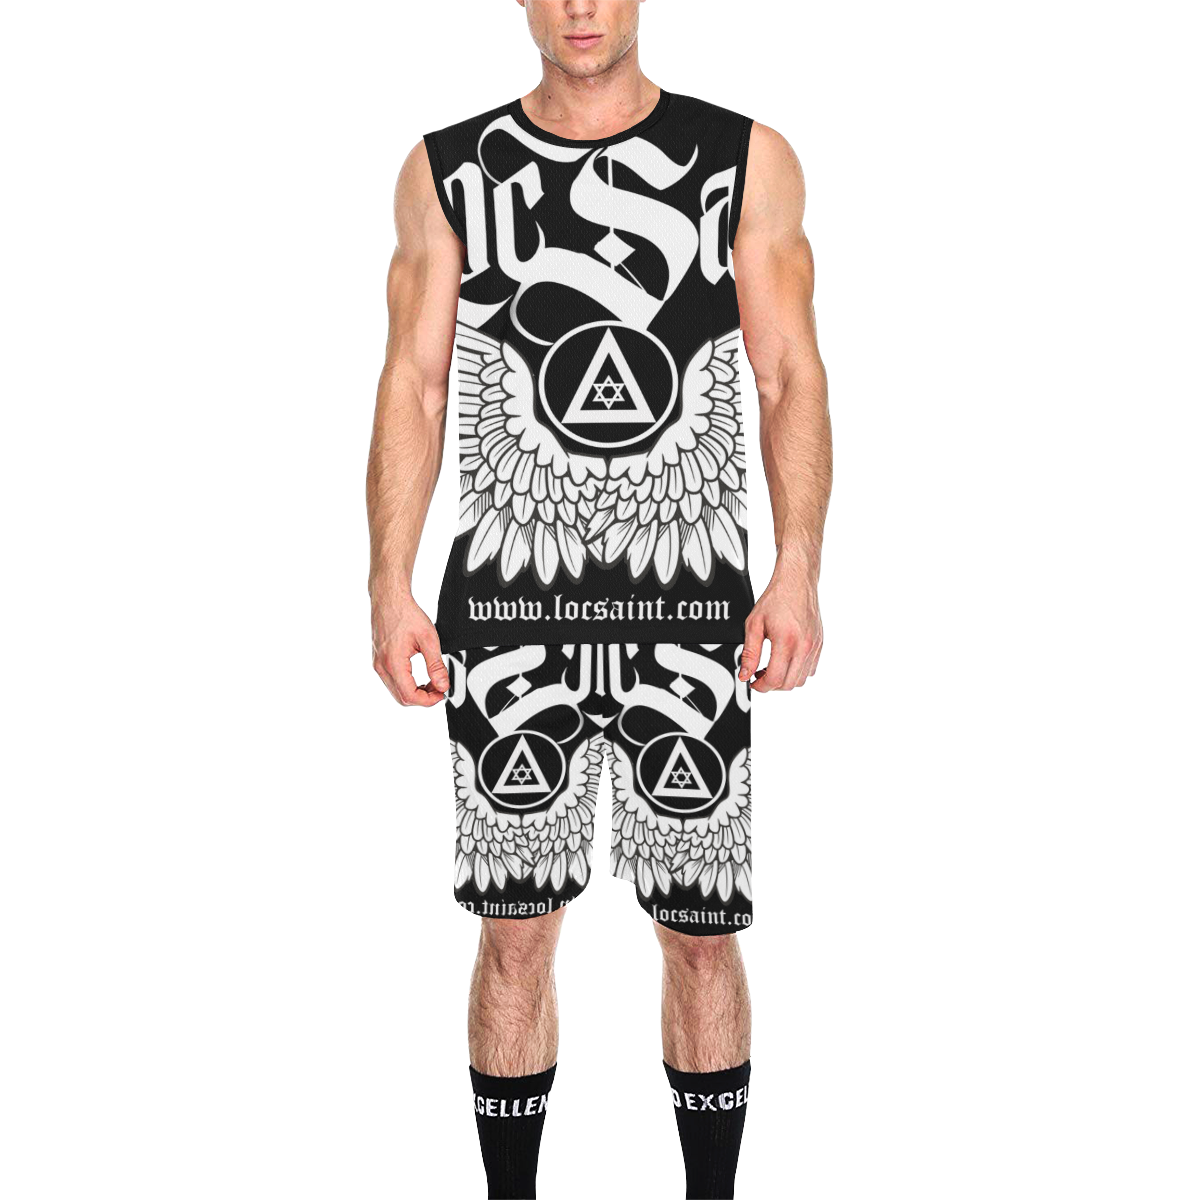 "Wings & Halo" Work Out Set All Over Print Basketball Uniform